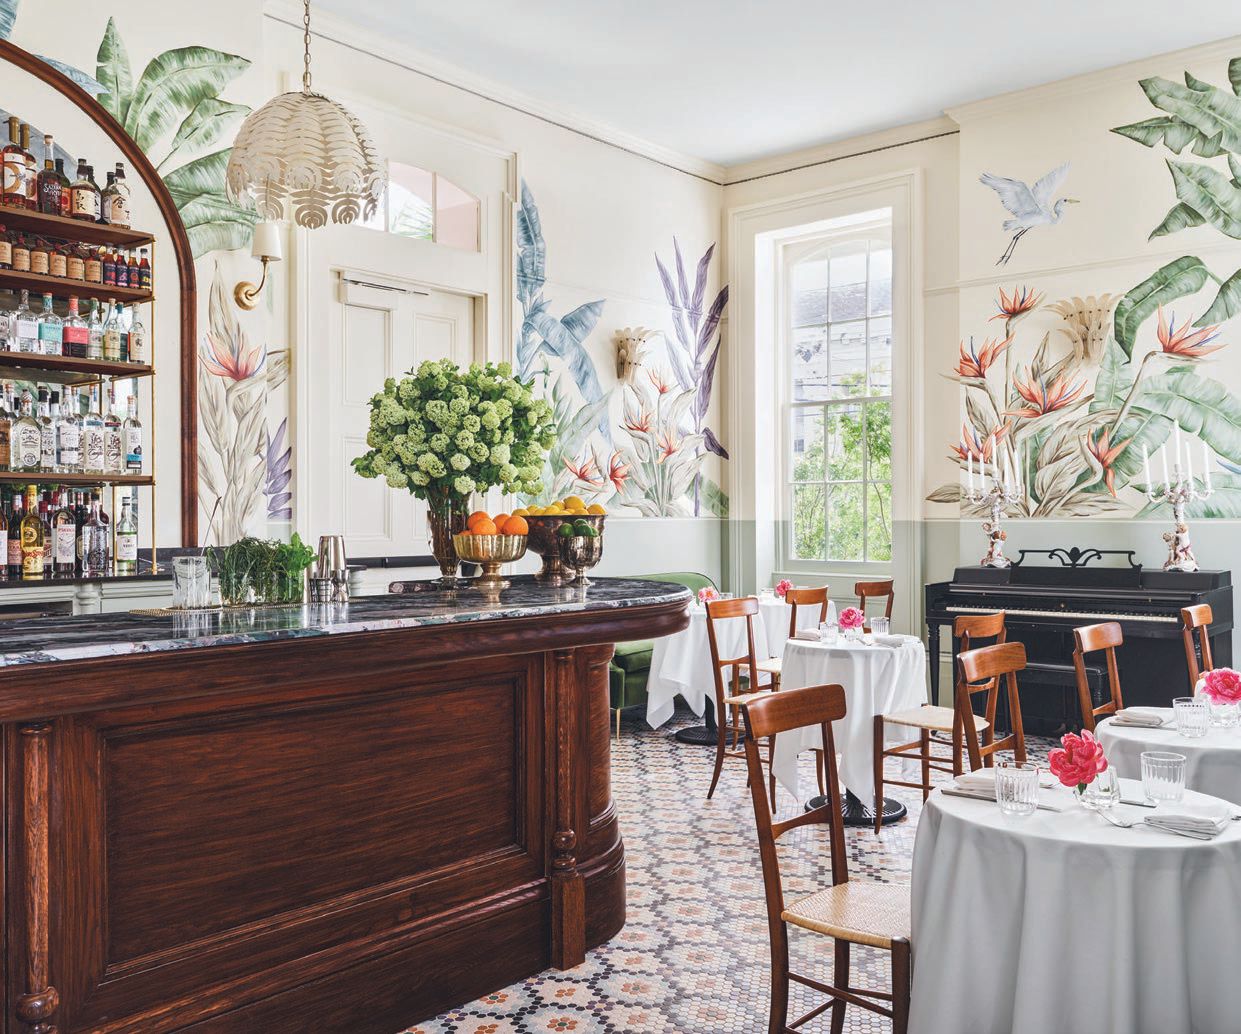 Bathed in light with custom mosaic tiled flooring and handpainted walls from New Orleans-based artist Ann Marie Auricchio, the Paradise Lounge is the perfect spot for a small bite or afternoon spritz PHOTO BY DOUGLAS FRIEDMAN